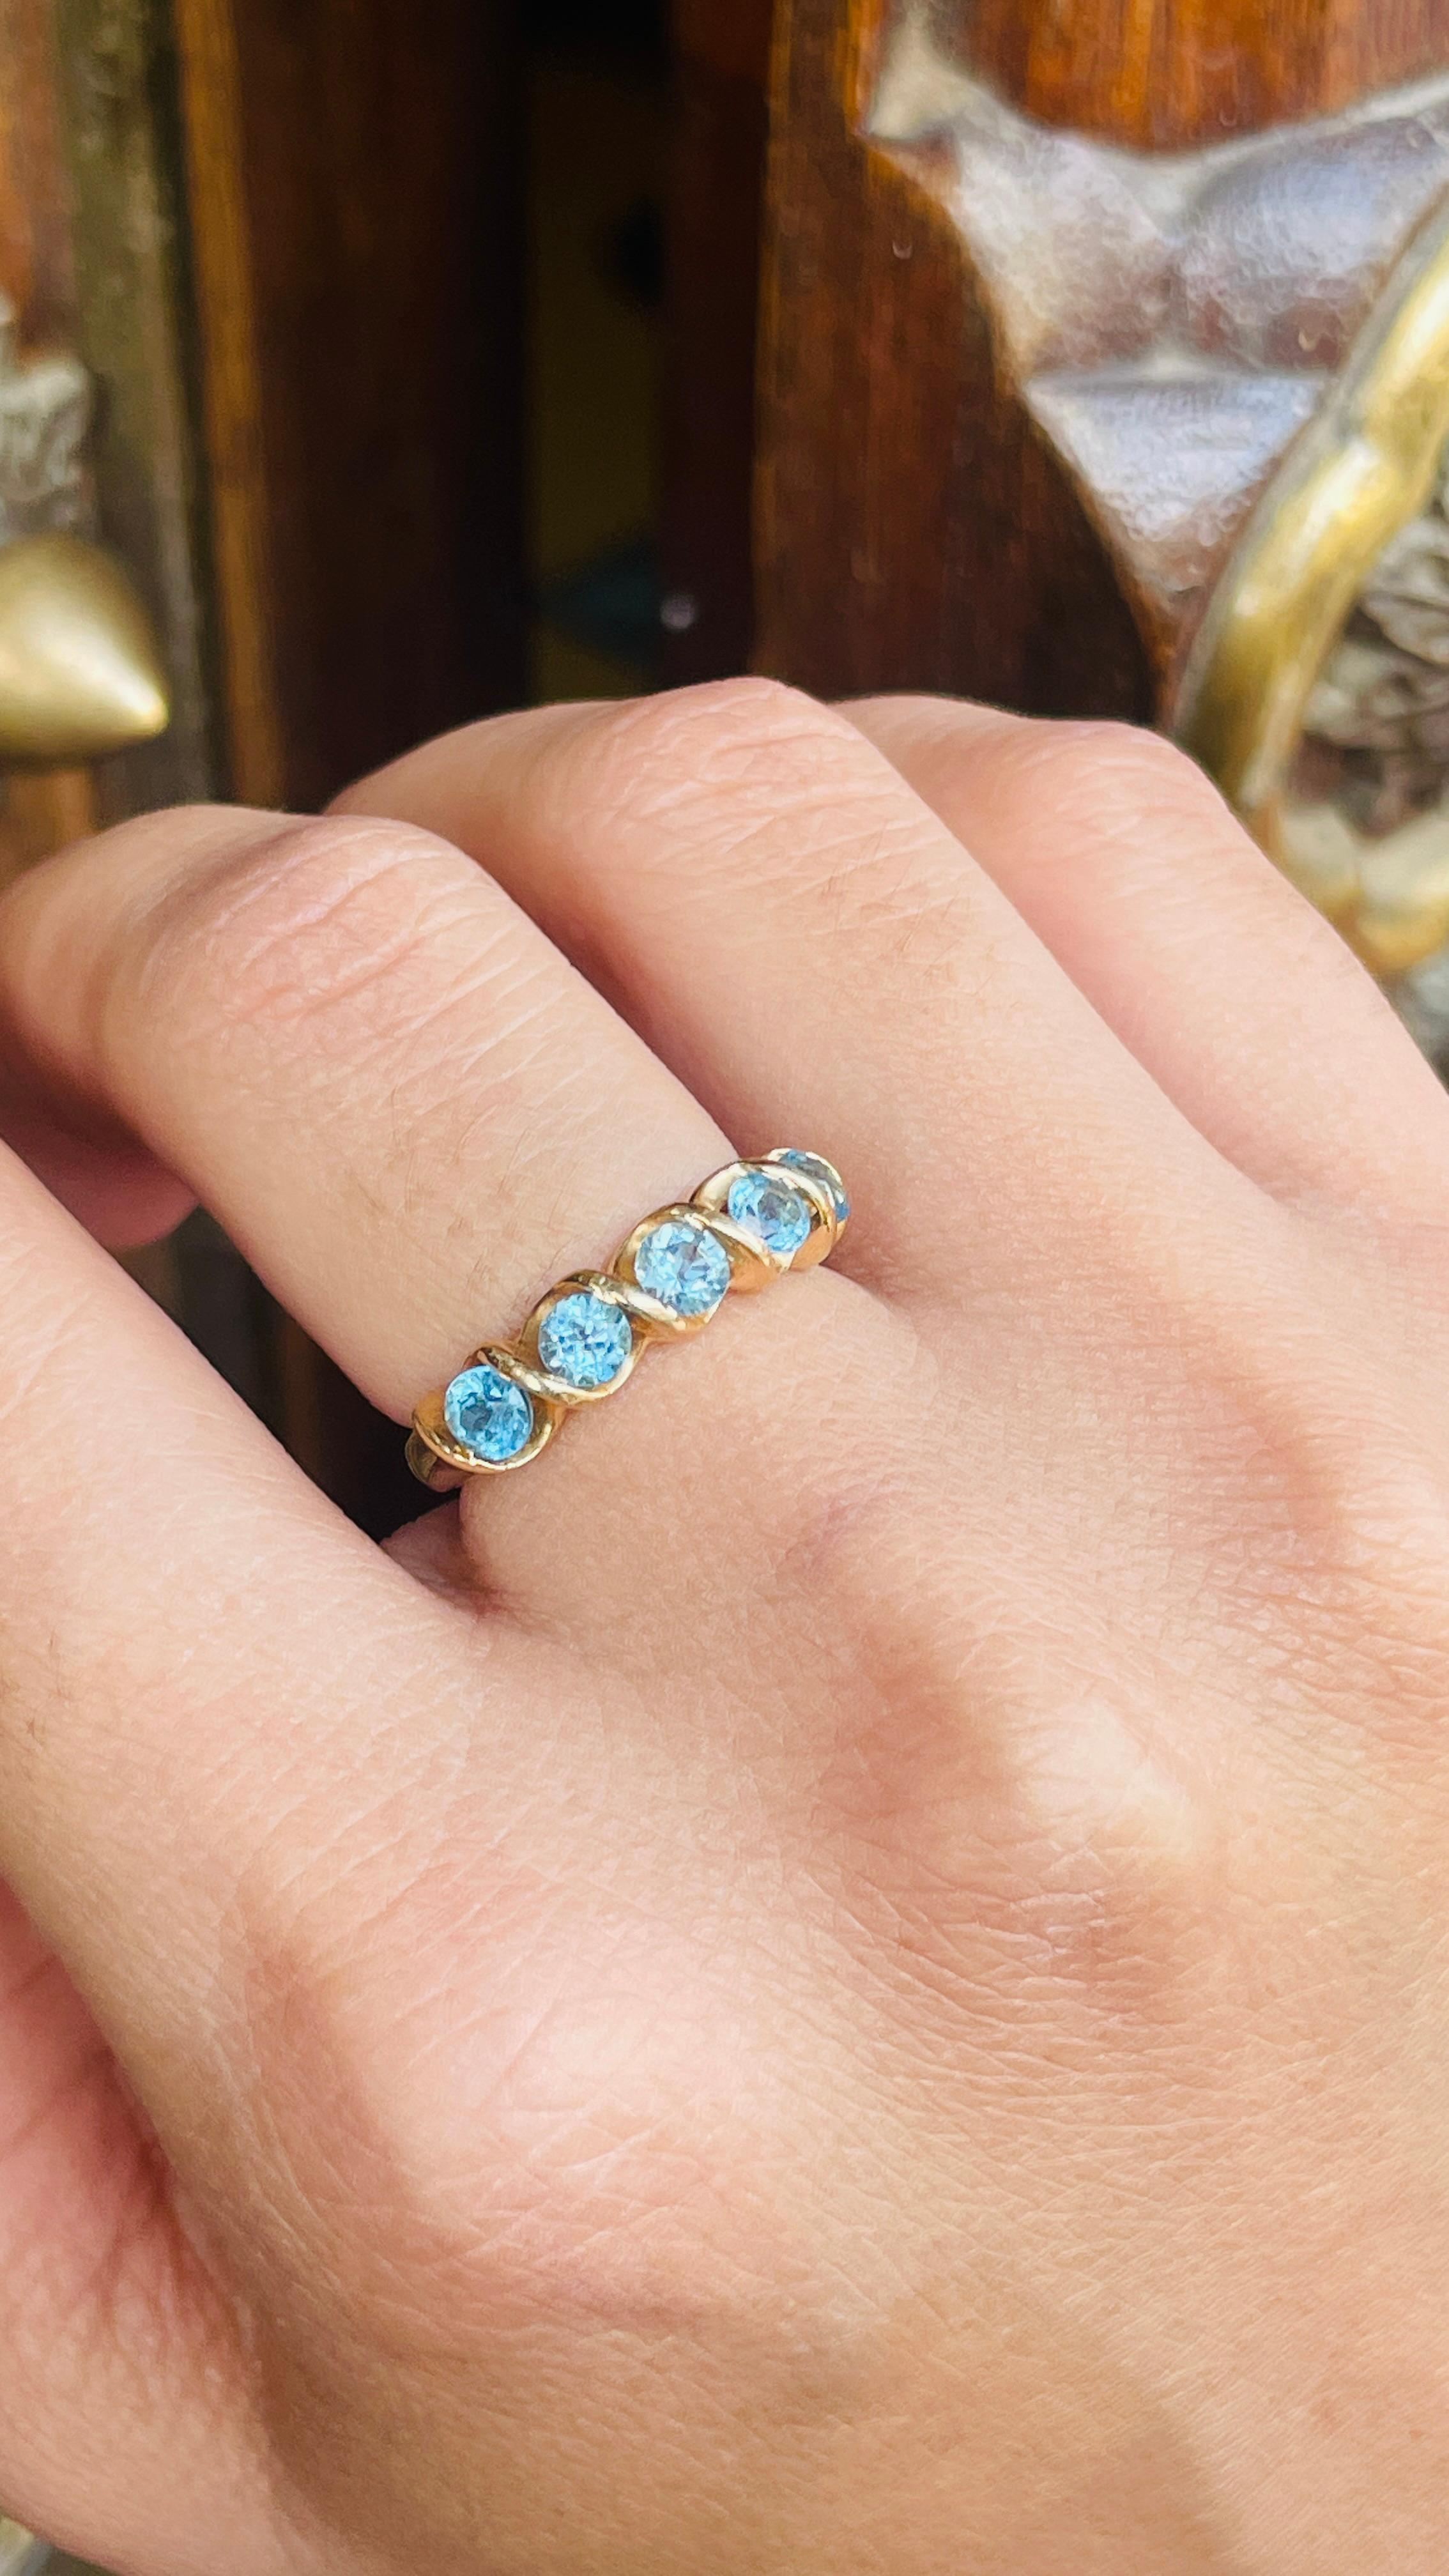 For Sale:  Blue Topaz Band Ring in 14k Solid Yellow Gold, December Birthstone Band 13